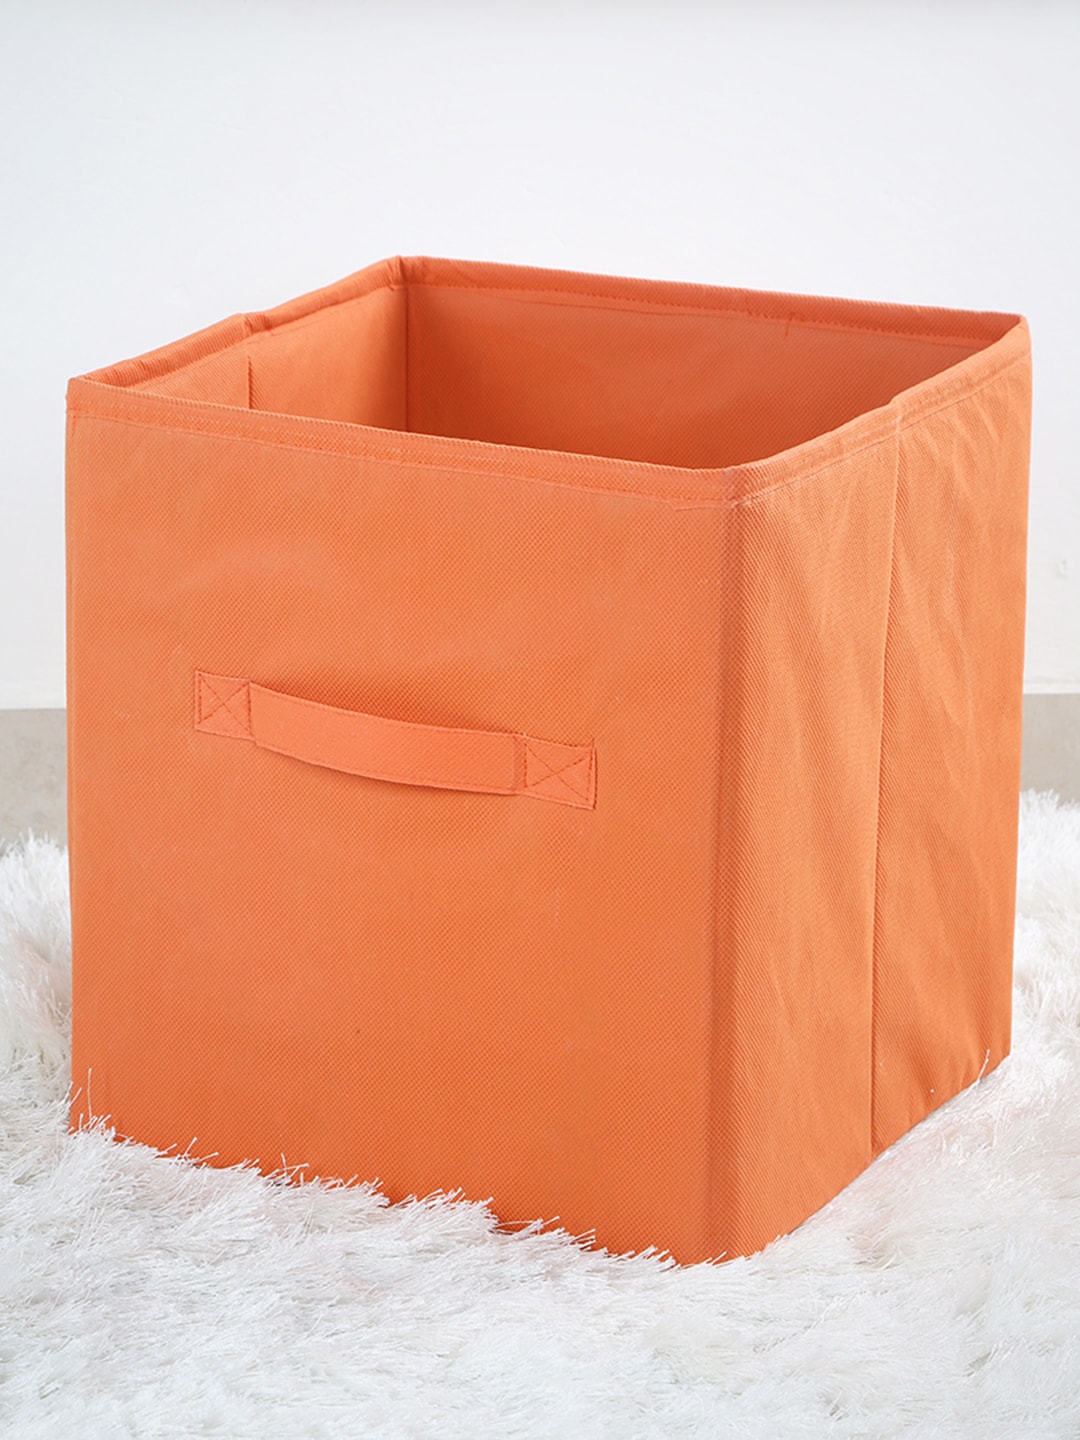 My Gift Booth Orange Storage Cube Price in India